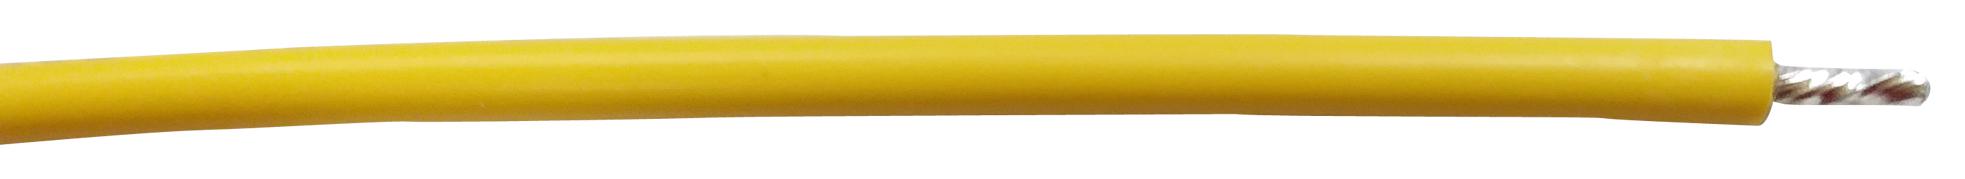 PP002402 HOOK-UP WIRE, 26AWG, YELLOW, 305M, 300V PRO POWER